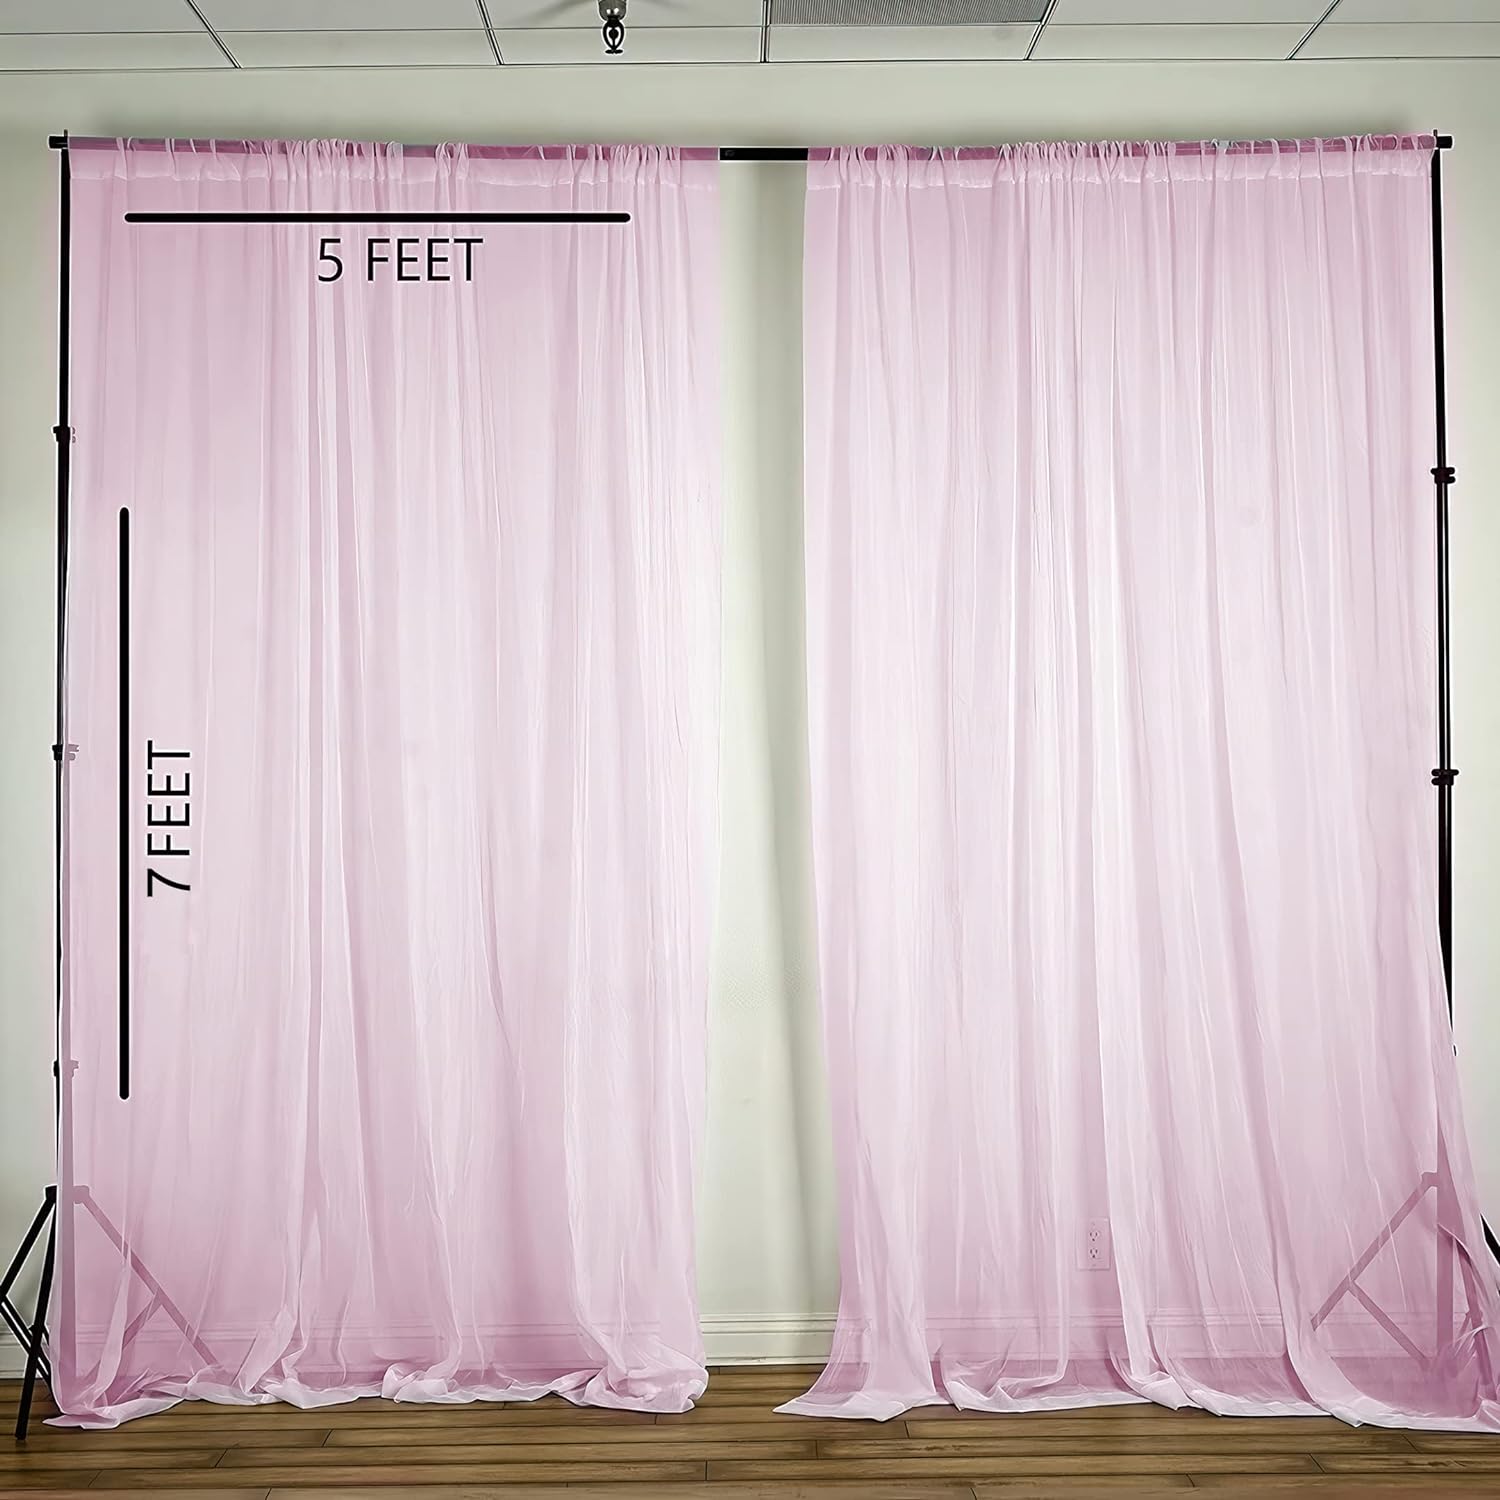 3pcs Pink Curtains to decorate your home